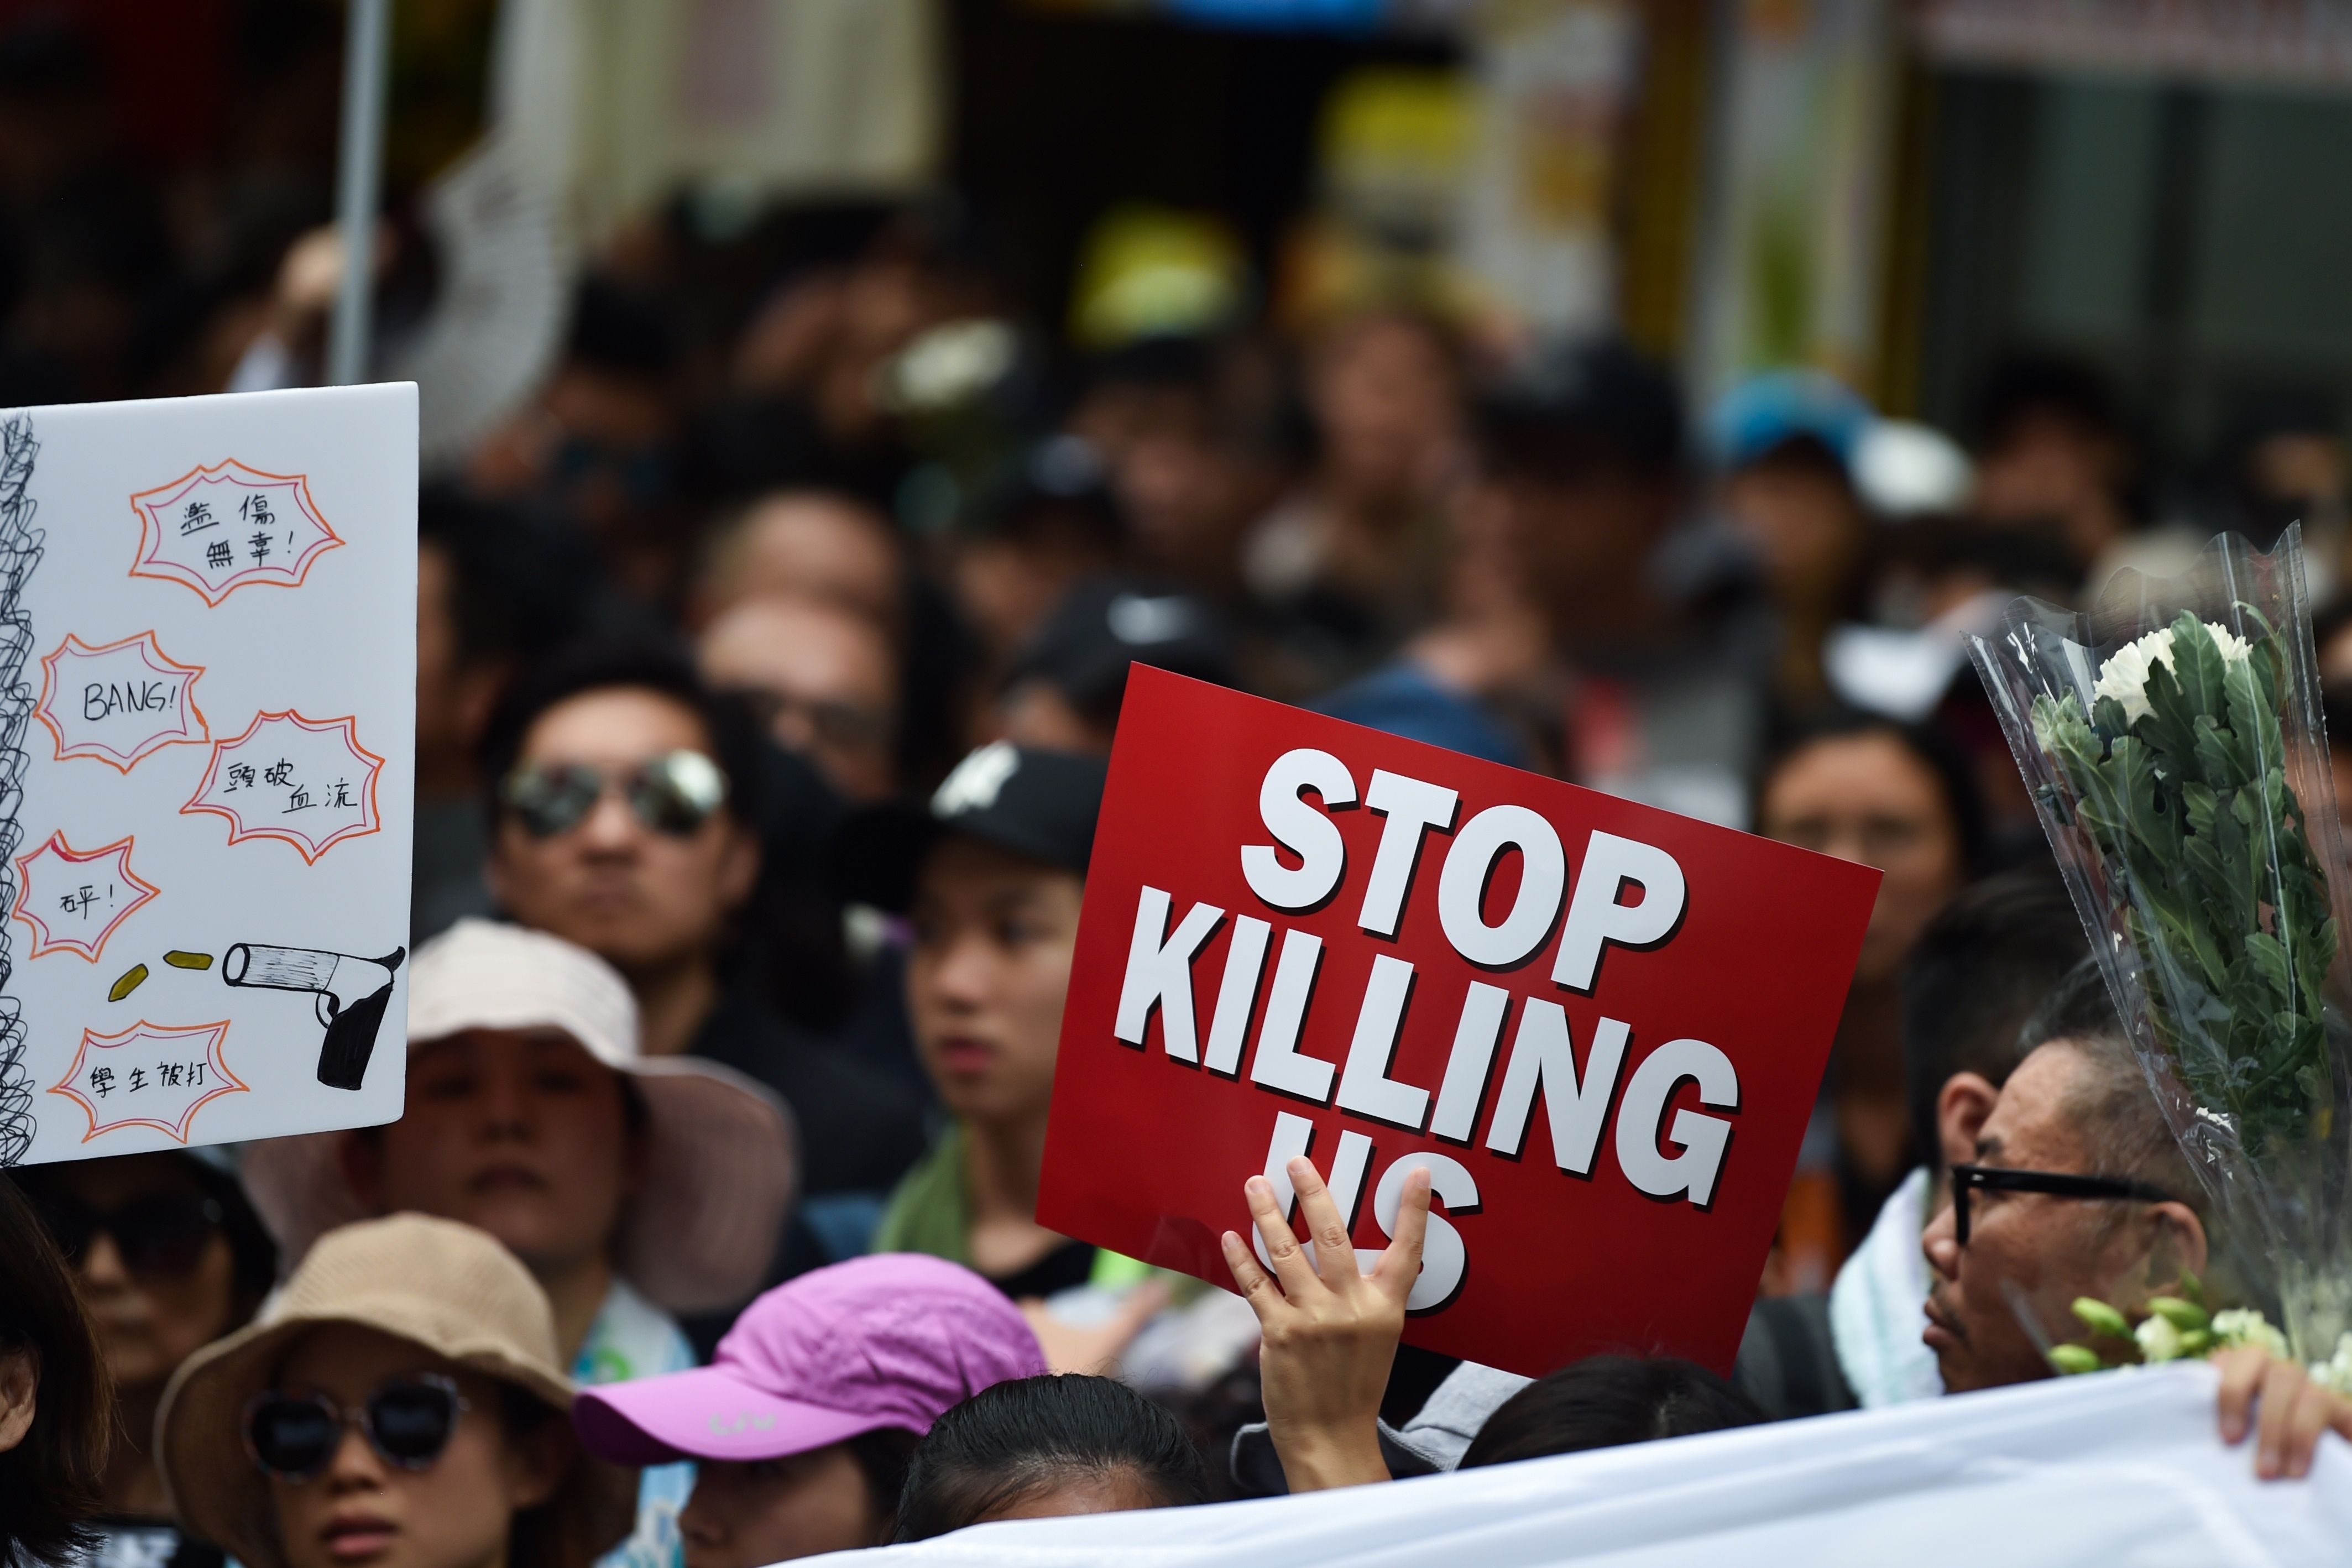 rotesters display placards during a march against a controversial extradition law proposal in Hong Kong.